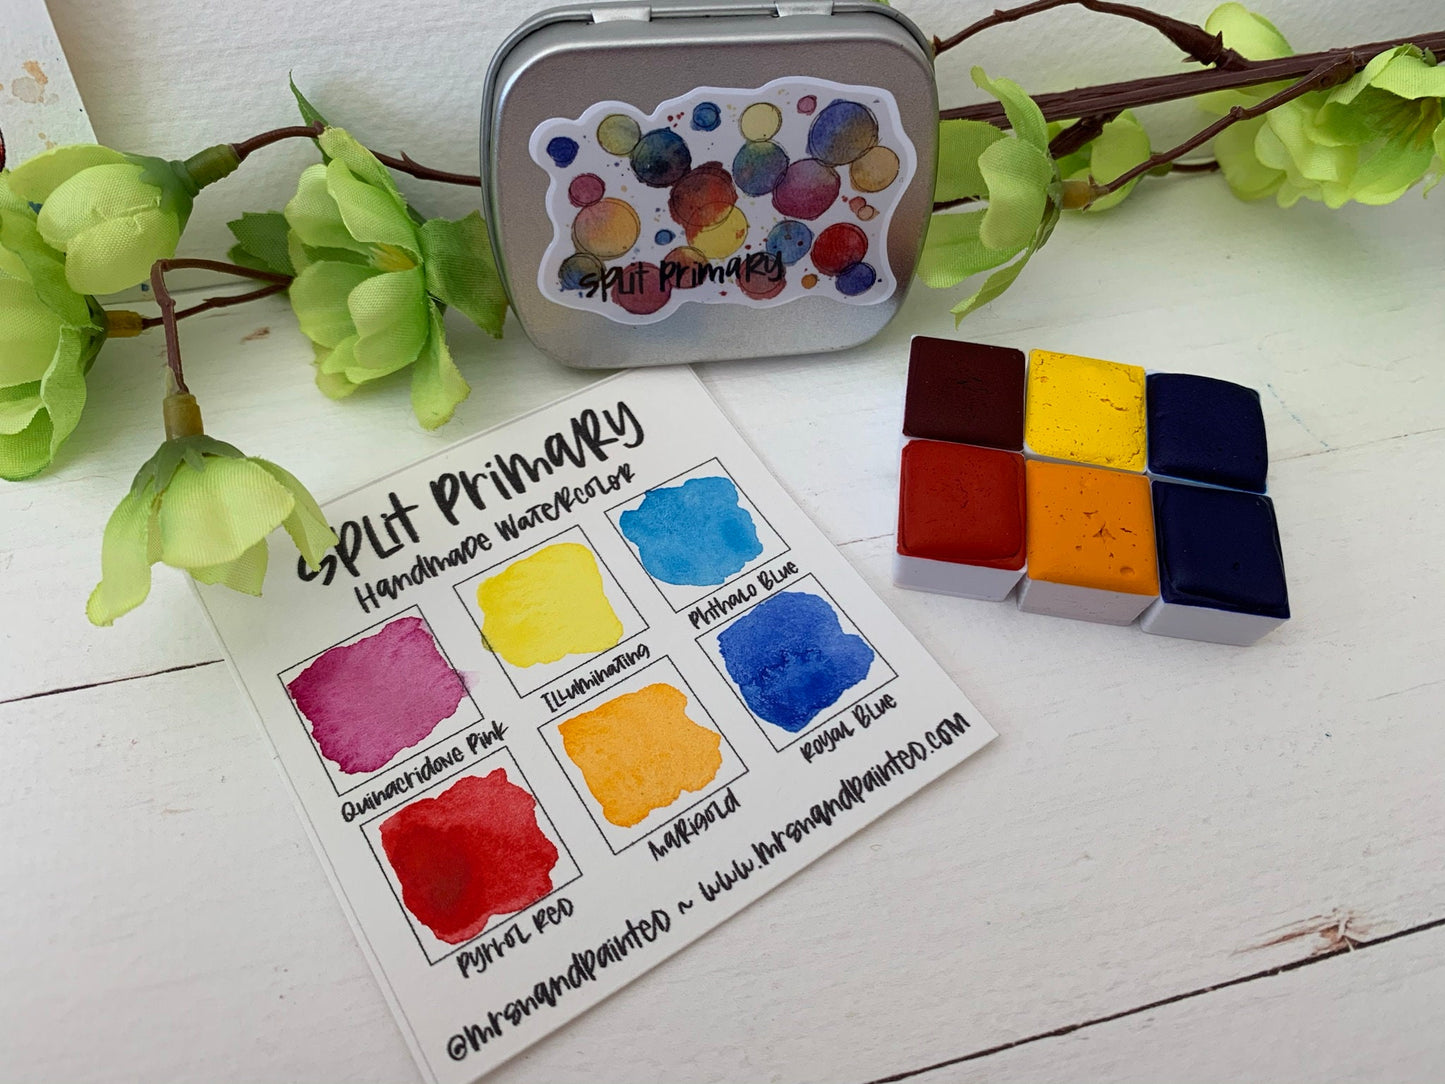 Handmade Watercolor Paints - SPLIT PRIMARY - Artisan Paint Palette, Set of 6 Matte Shades, Red, Yellow and Blue Mixing Palette Warm and Cool